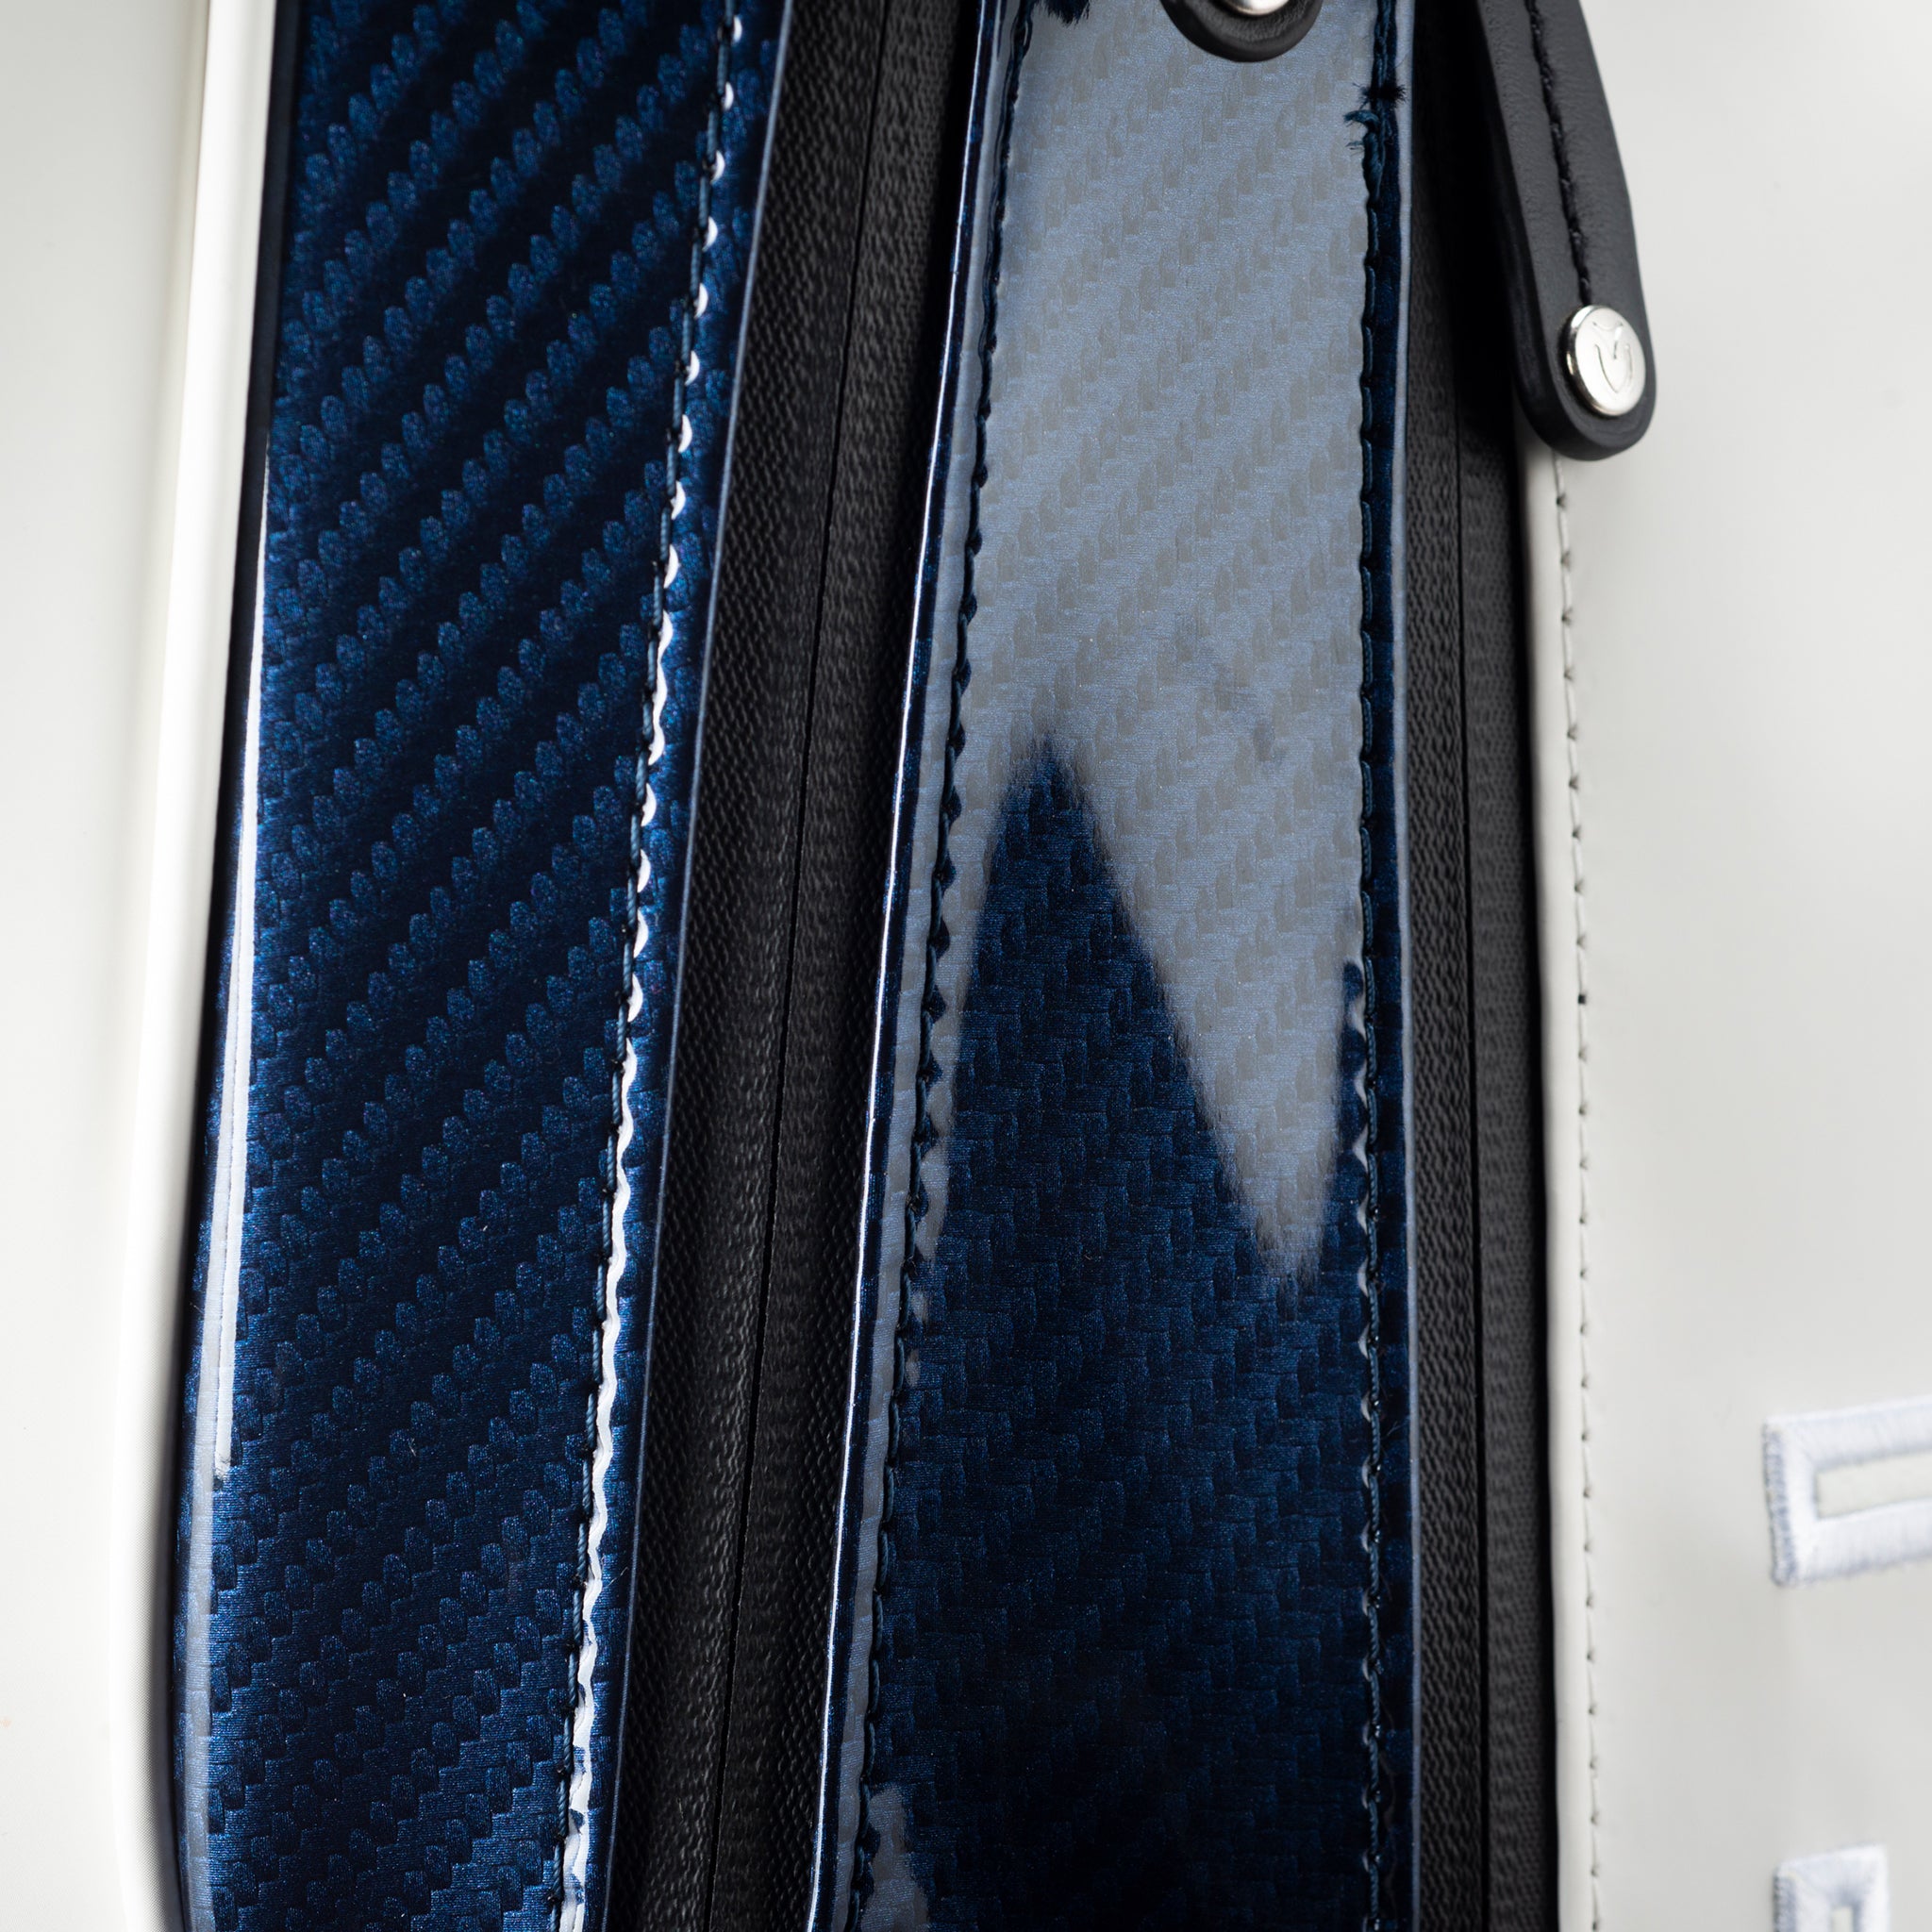 Close up image of carbon navy material on golf bag